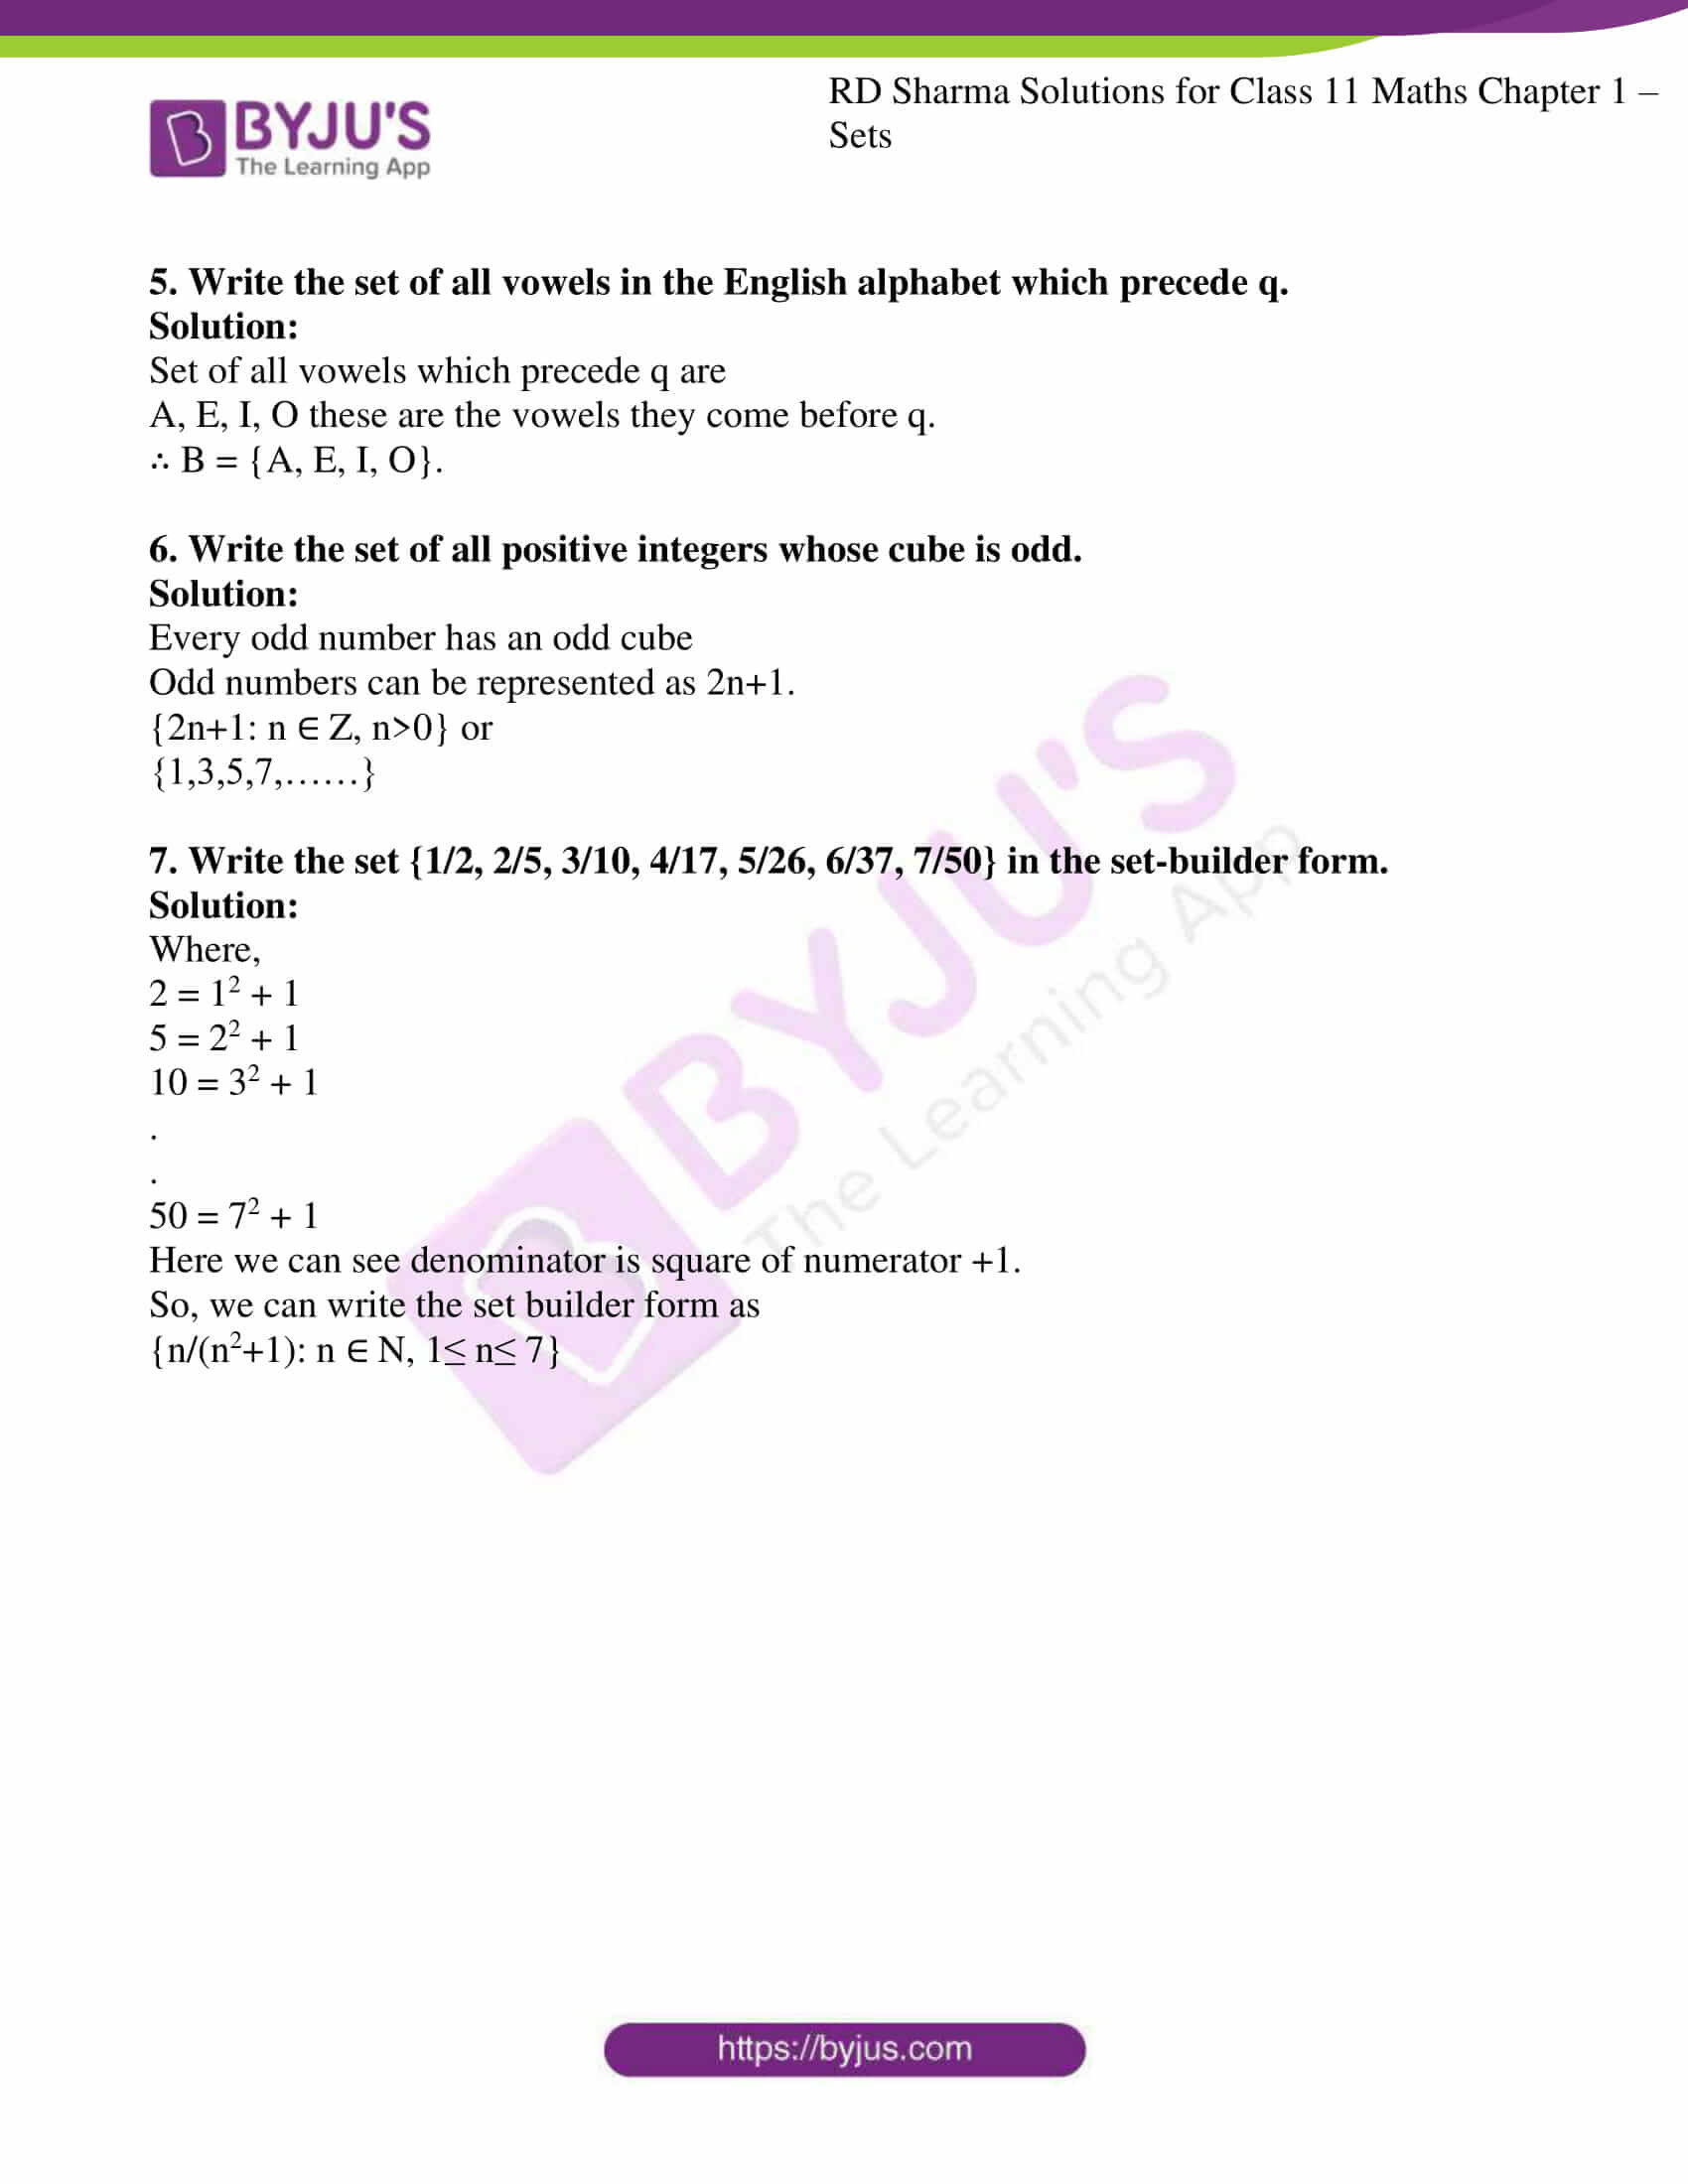 Set Builder Notation Worksheet Rd Sharma solutions for Class 11 Chapter 1 Sets